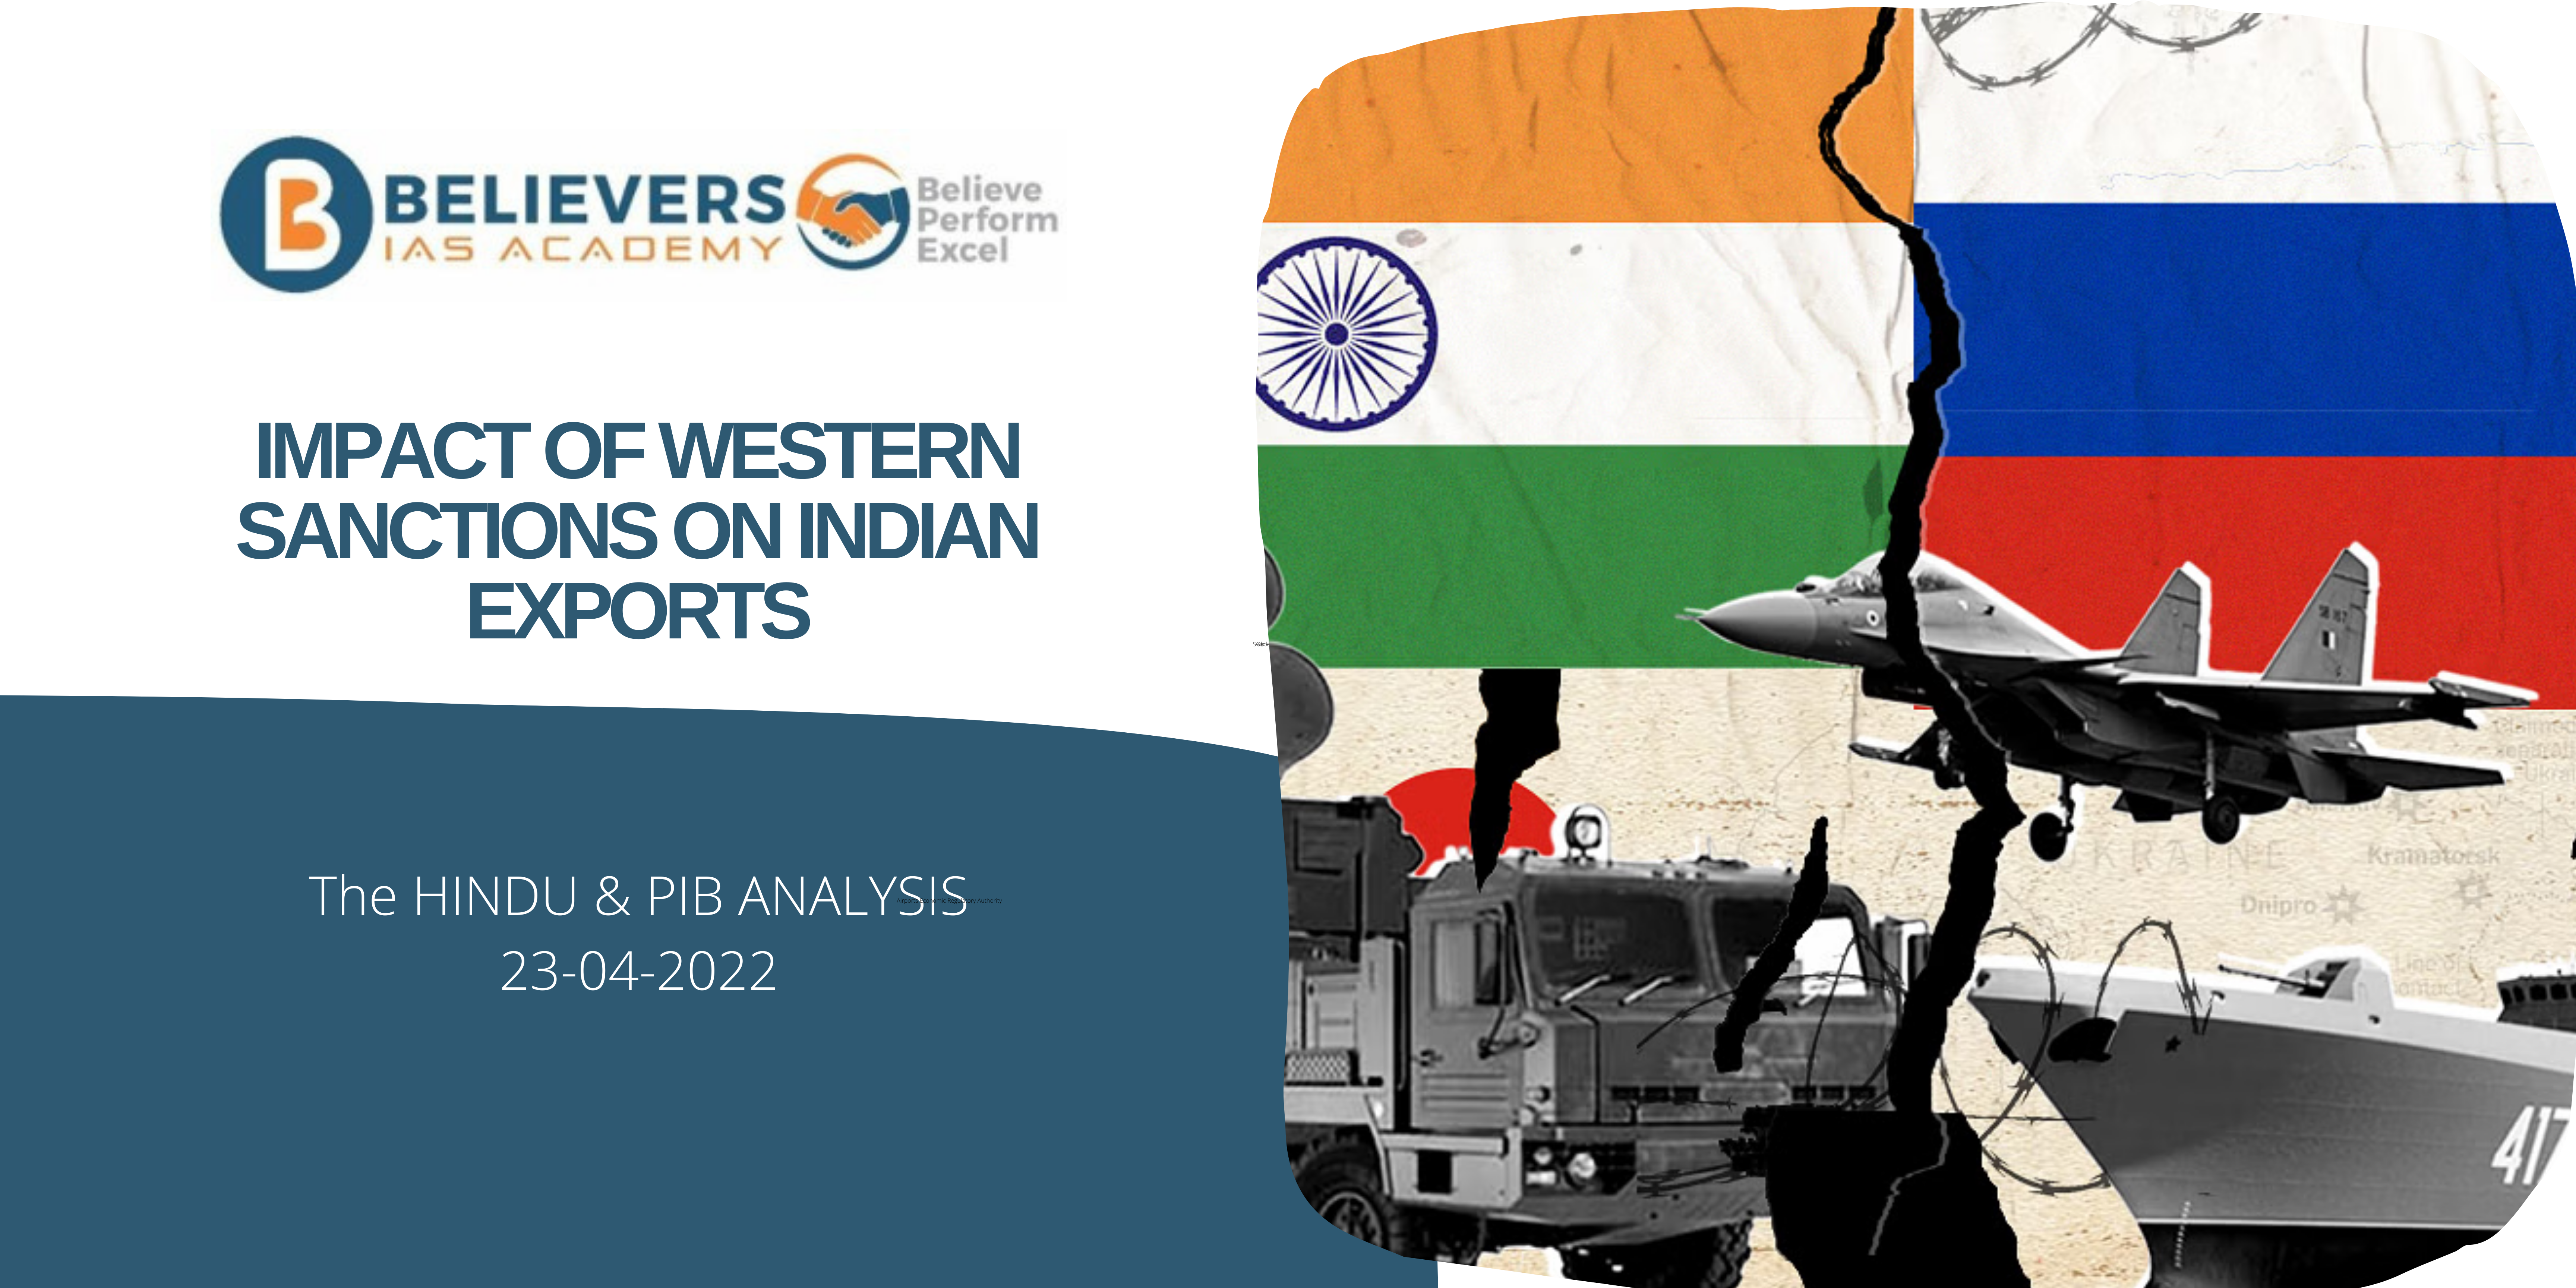 UPSC Current affairs - Impact of Western Sanctions on Indian Exports